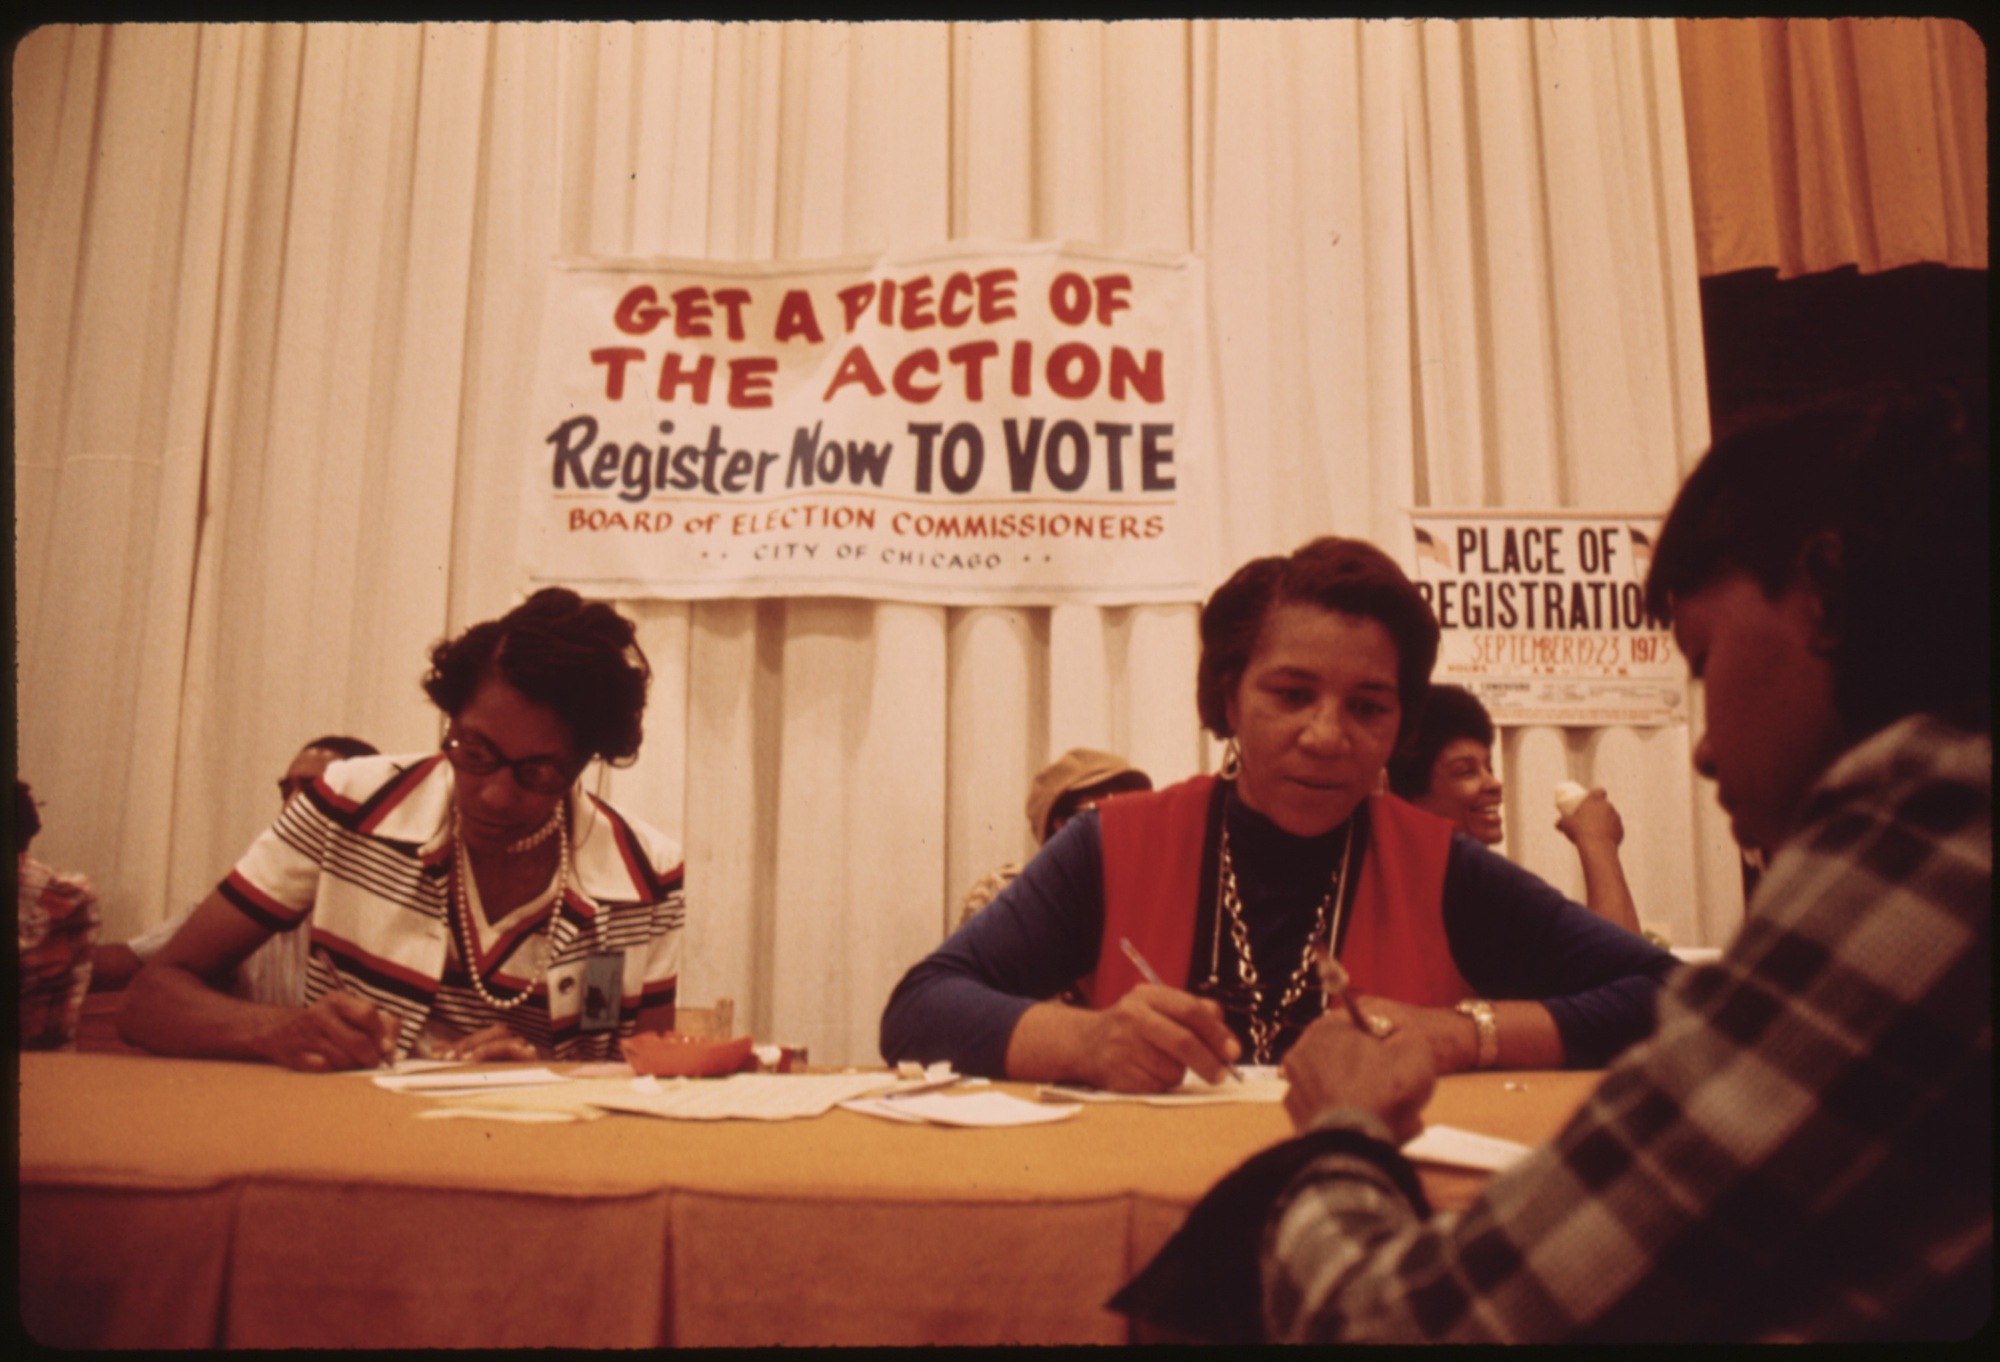 Two people sign papers registering a third person to vote at the Black Expo in 1973, behind the table a sign reads "Get a piece of the action Register now TO VOTE"